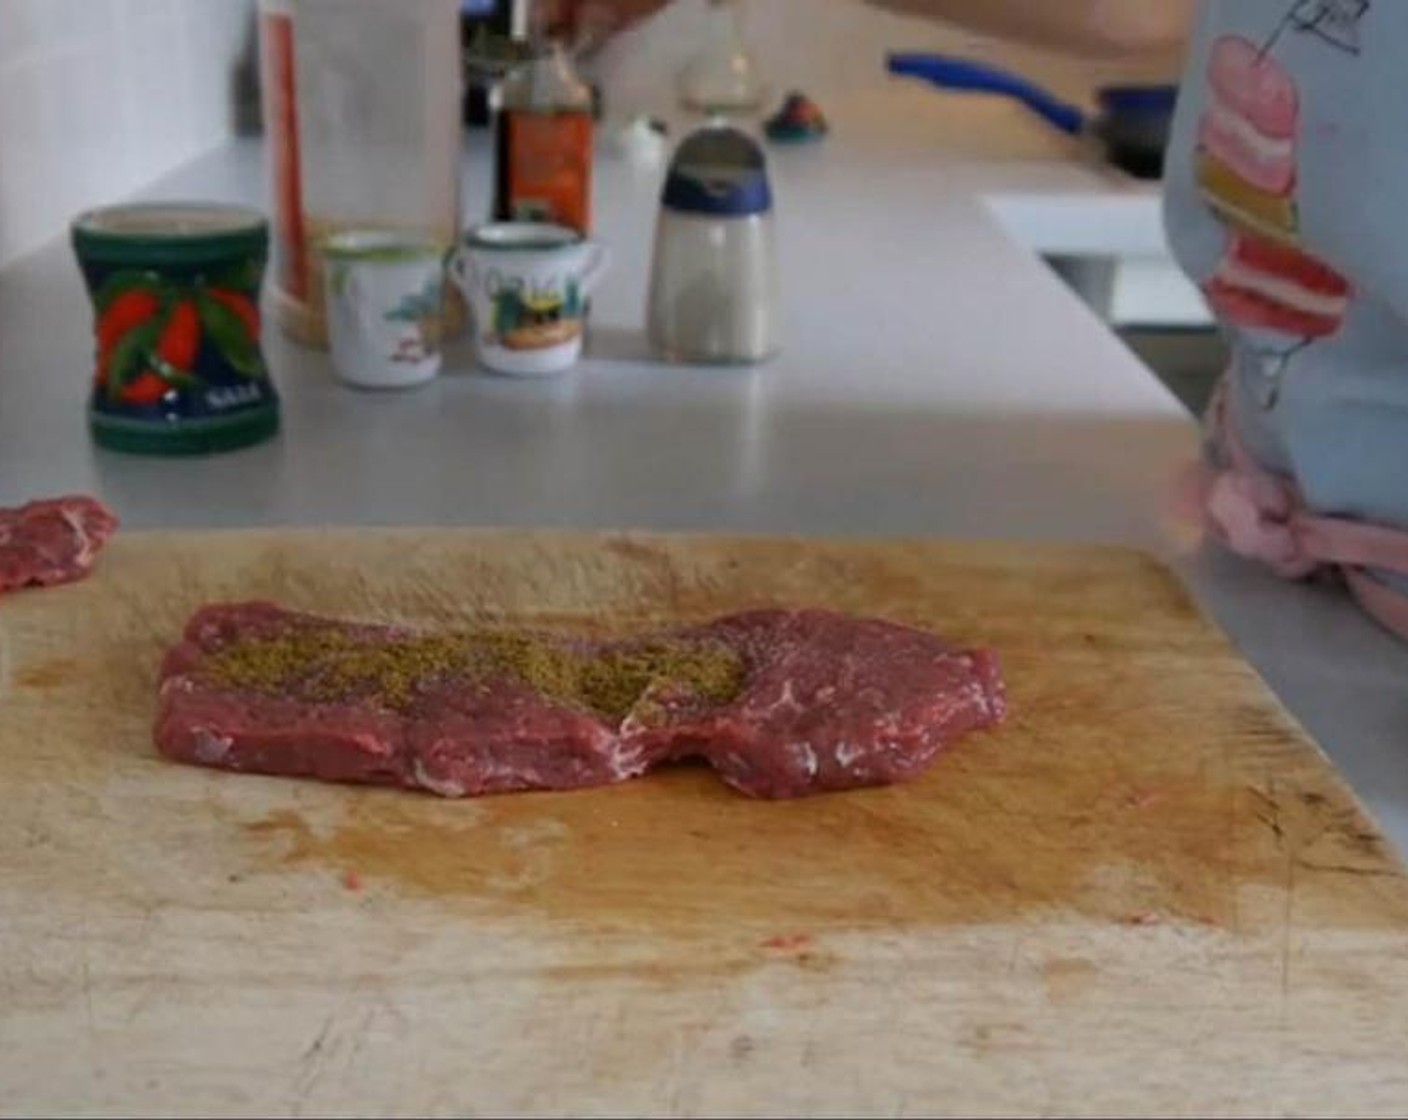 step 1 The first thing is to season the Beef Steak (9 oz), and I’m using my go to seasoning with Ground Cumin (1/2 tsp), Dried Oregano (1/2 tsp), Worcestershire Sauce (1 Tbsp), Salt (1/2 tsp), Ground Black Pepper (1/4 tsp), and Garlic Powder (1/2 tsp).Once the beef is seasoned leave it to marinate for at least an hour or better over night.